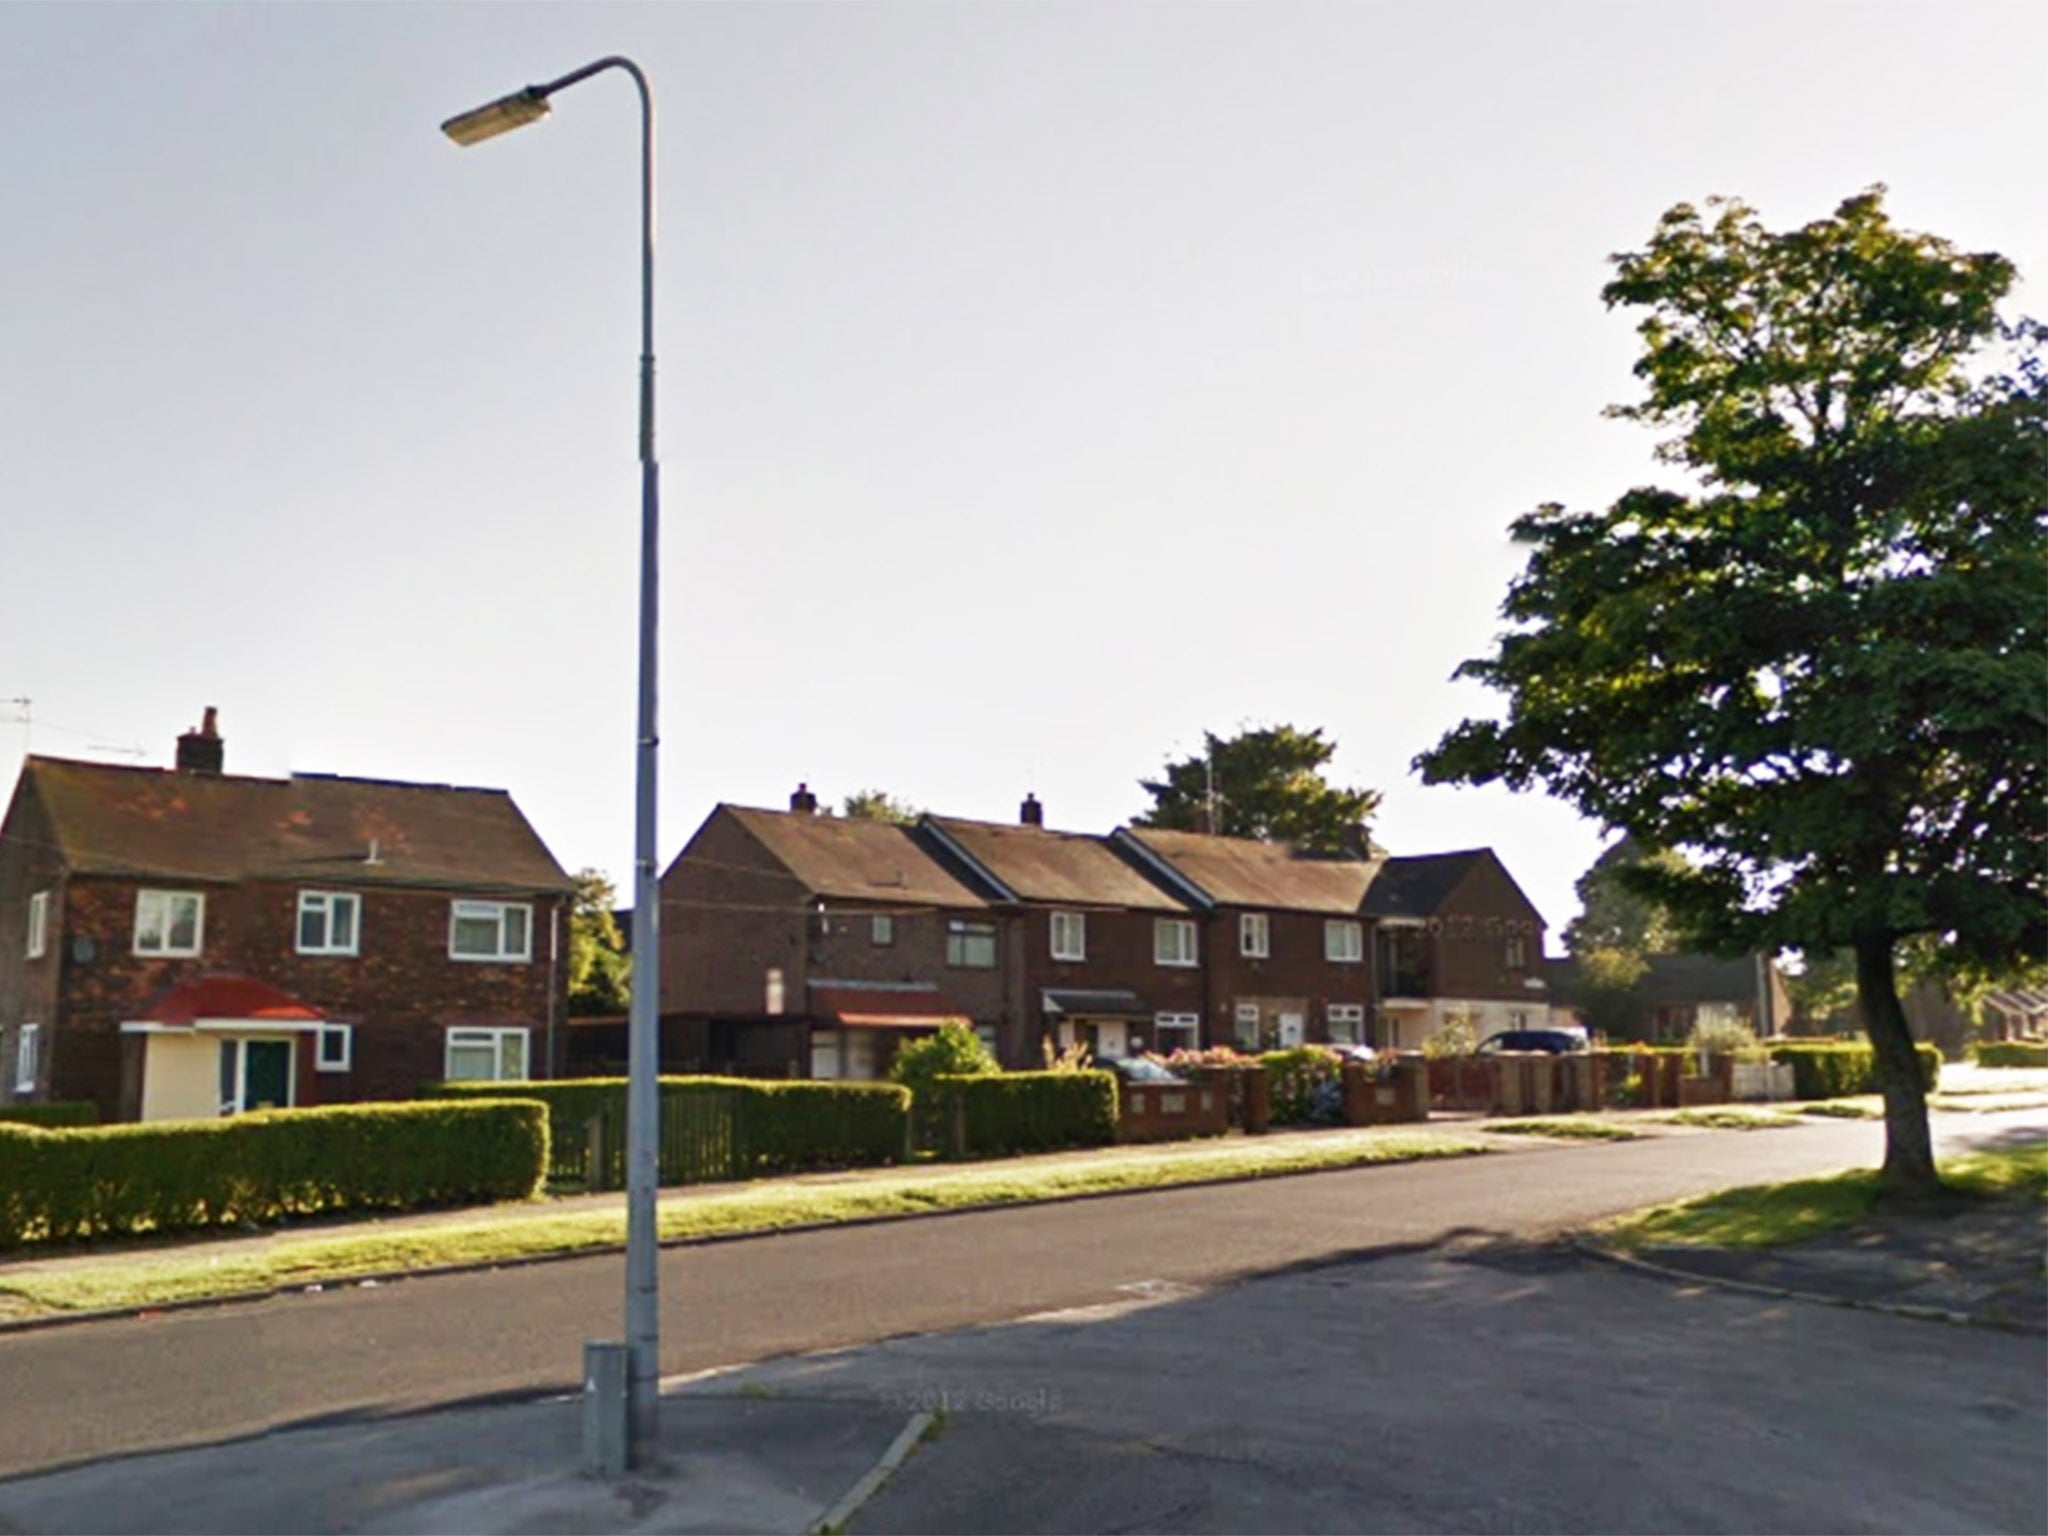 A cyclist was knocked down and attacked in Middleton, police say